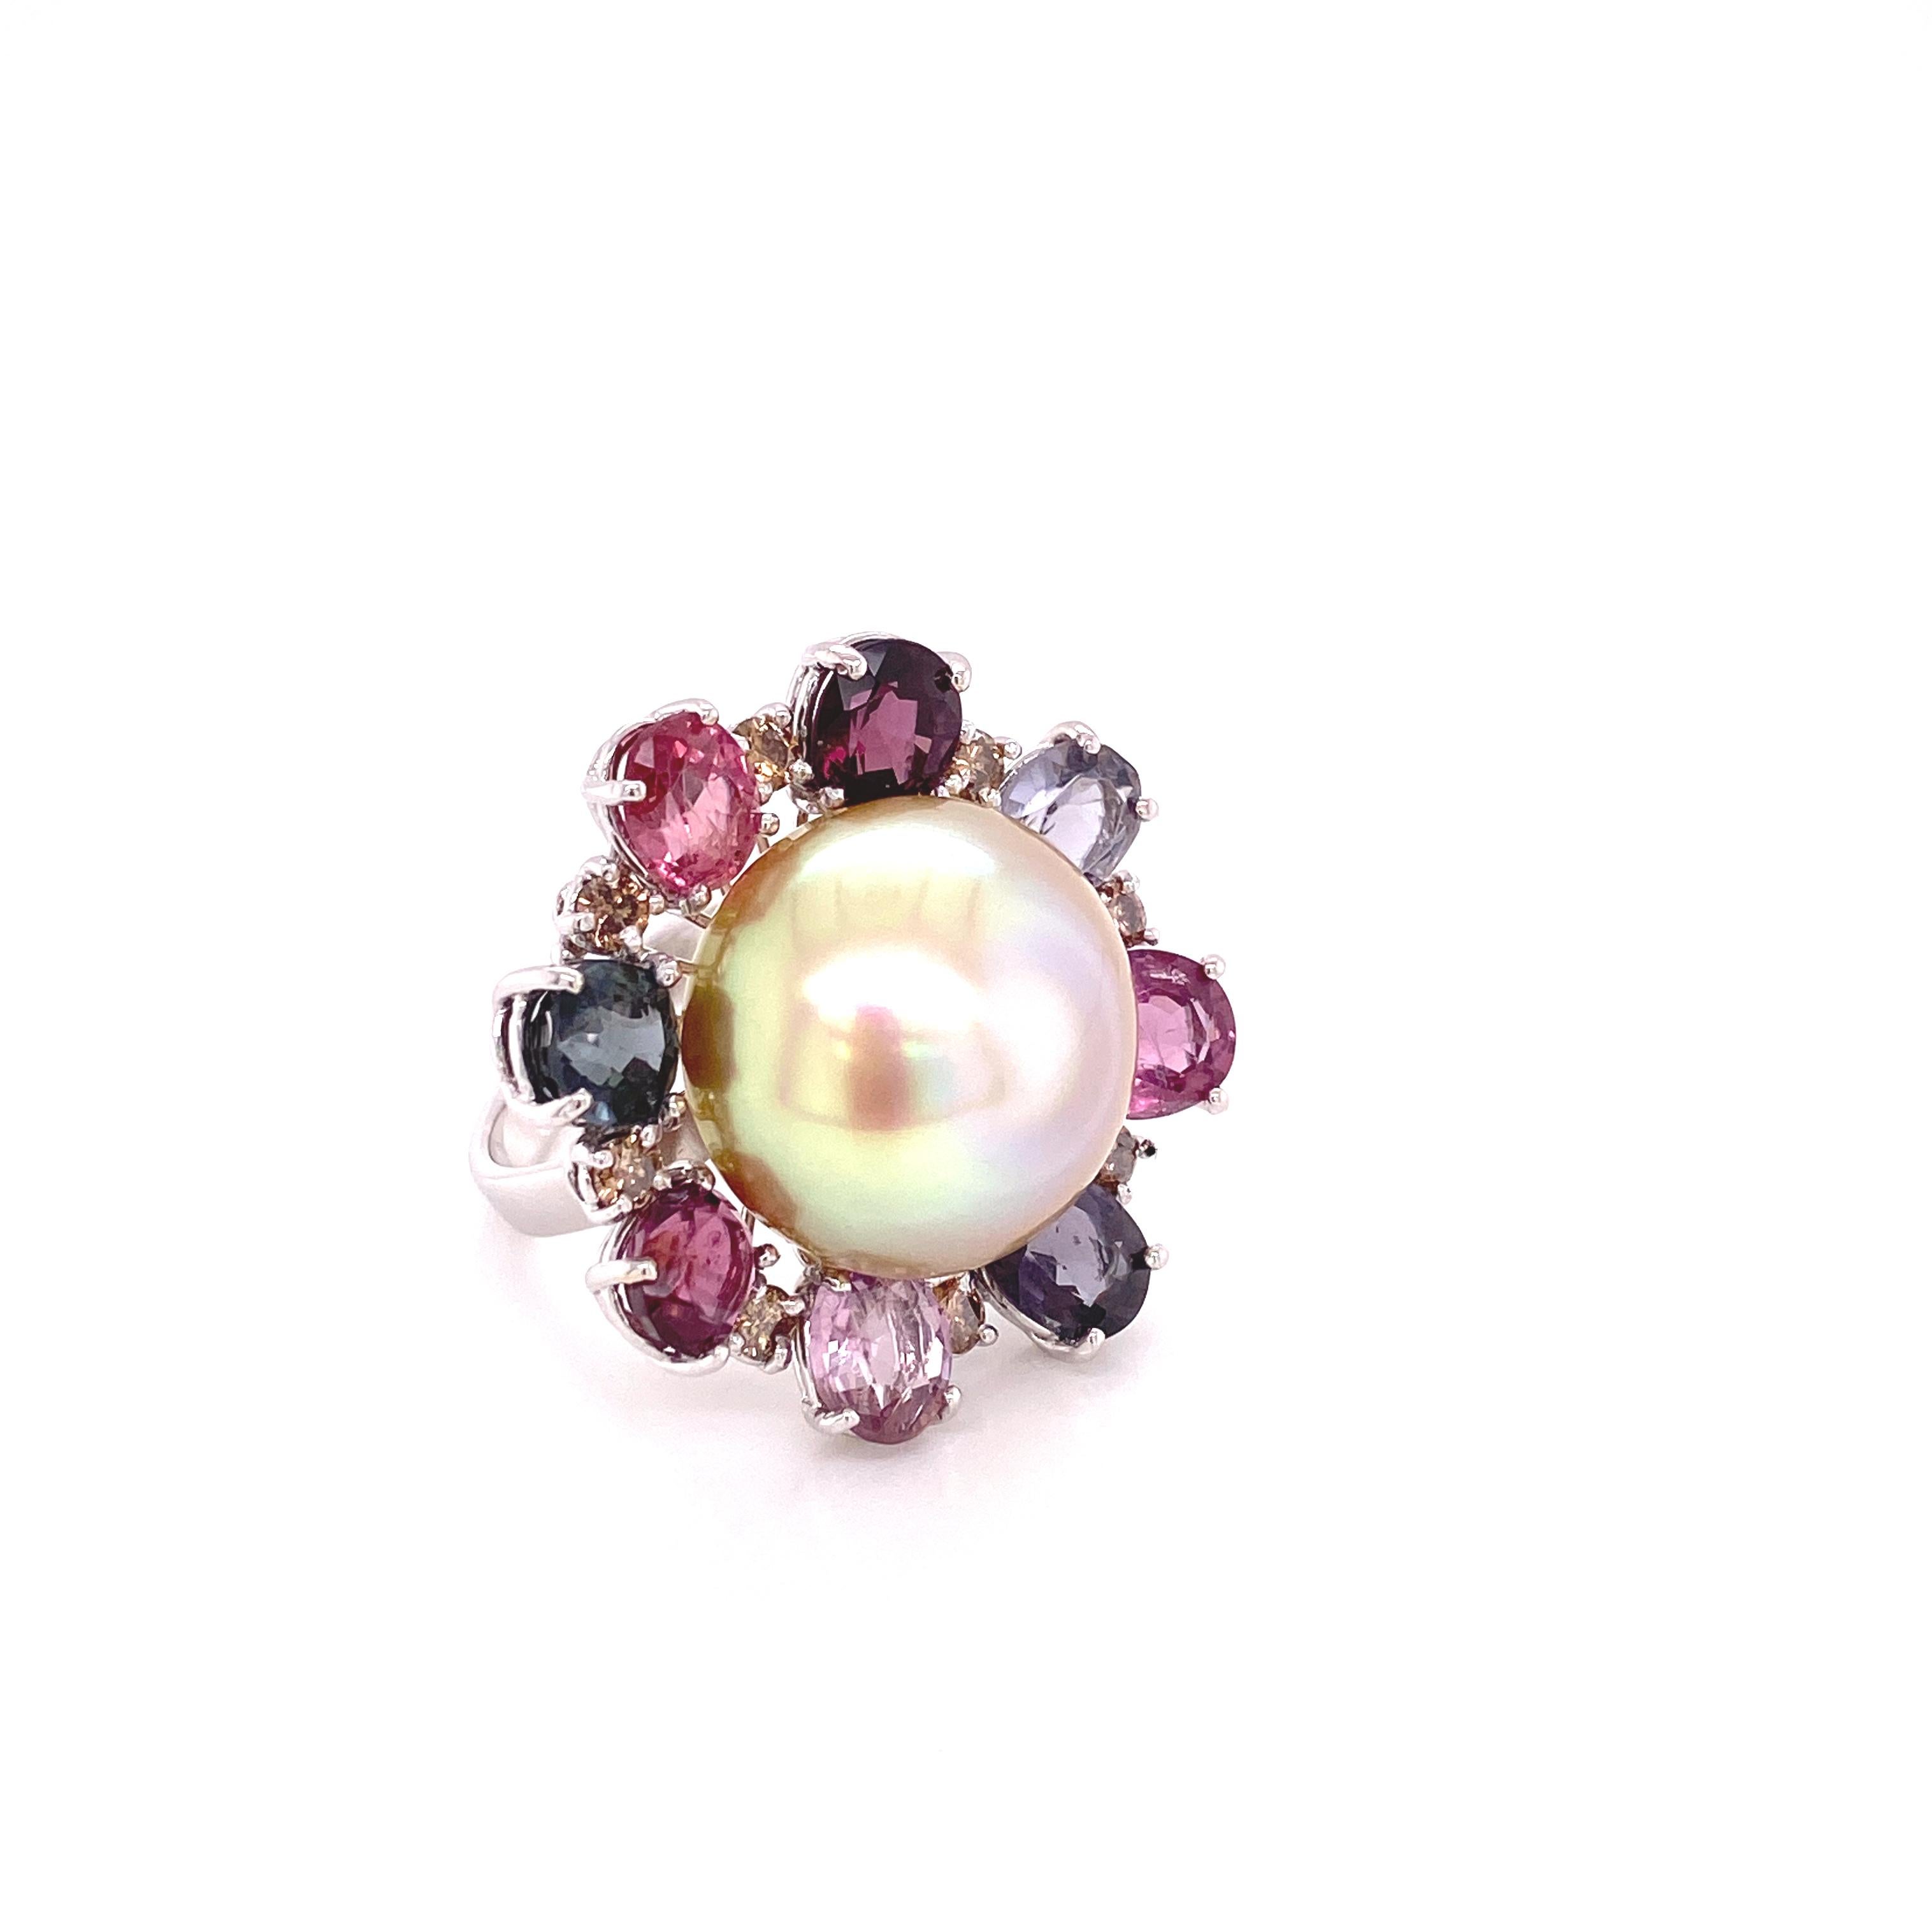 Contemporary South Sea Golden Pearl, Burmese Multicolored Spinel, and Brown Diamond Ring